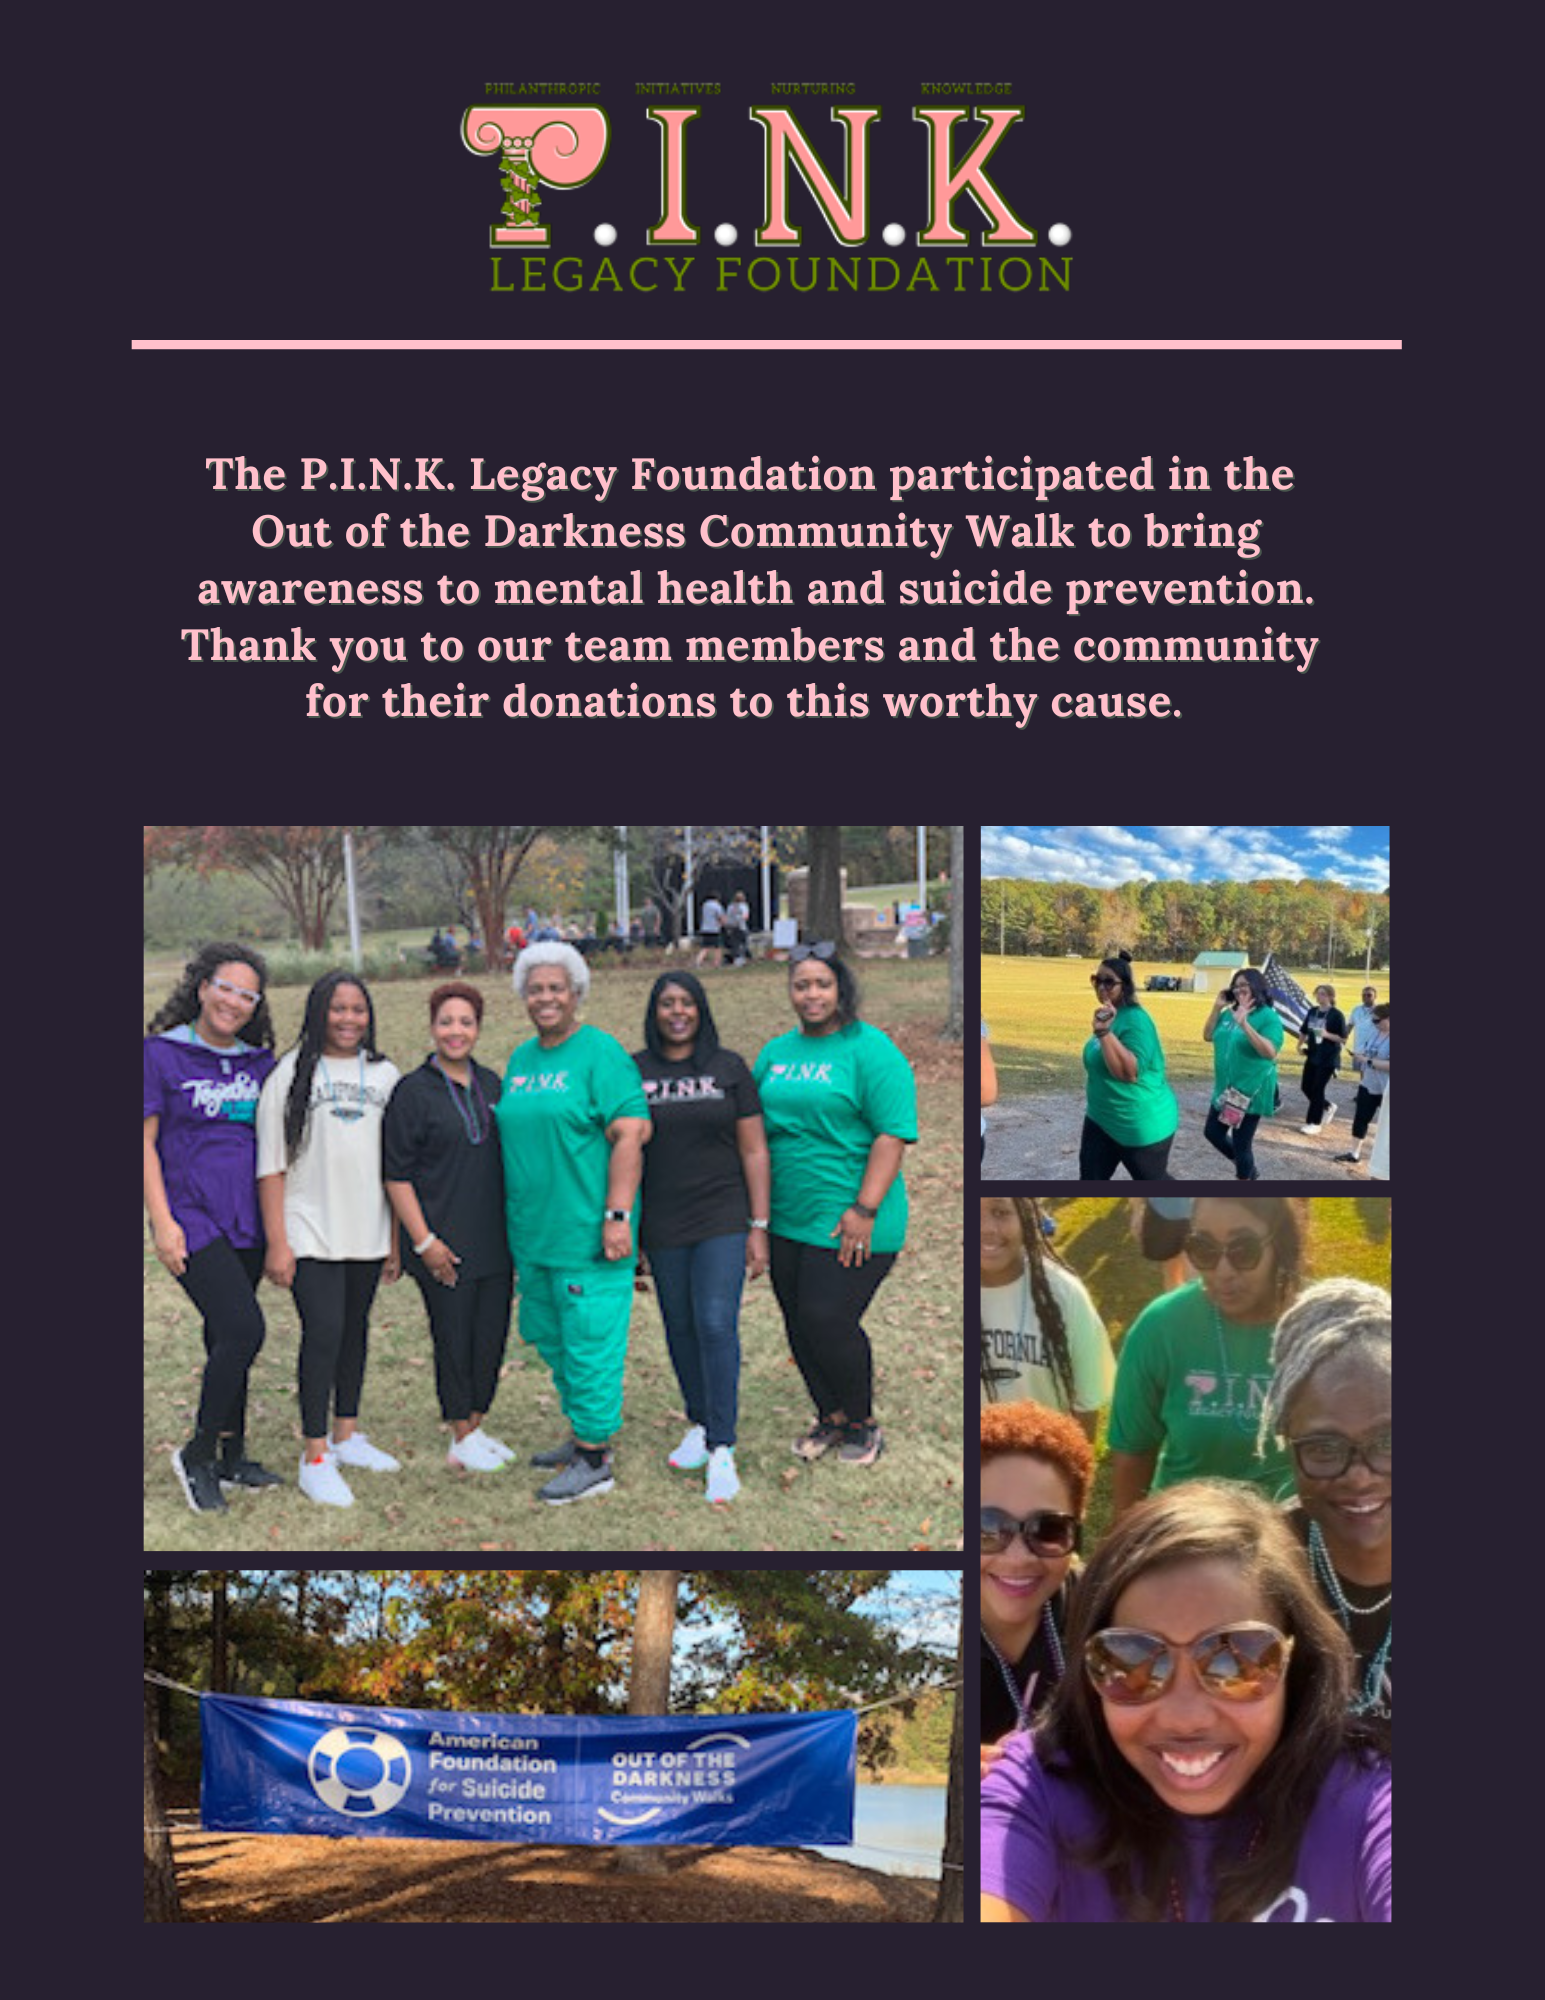 The P.I.N.K. Legacy Foundation participated in the Out of the Darkness Community Walk to bring awareness to mental health and suicide prevention. Thank you to our team members and the community for their donations to this worthy cause.